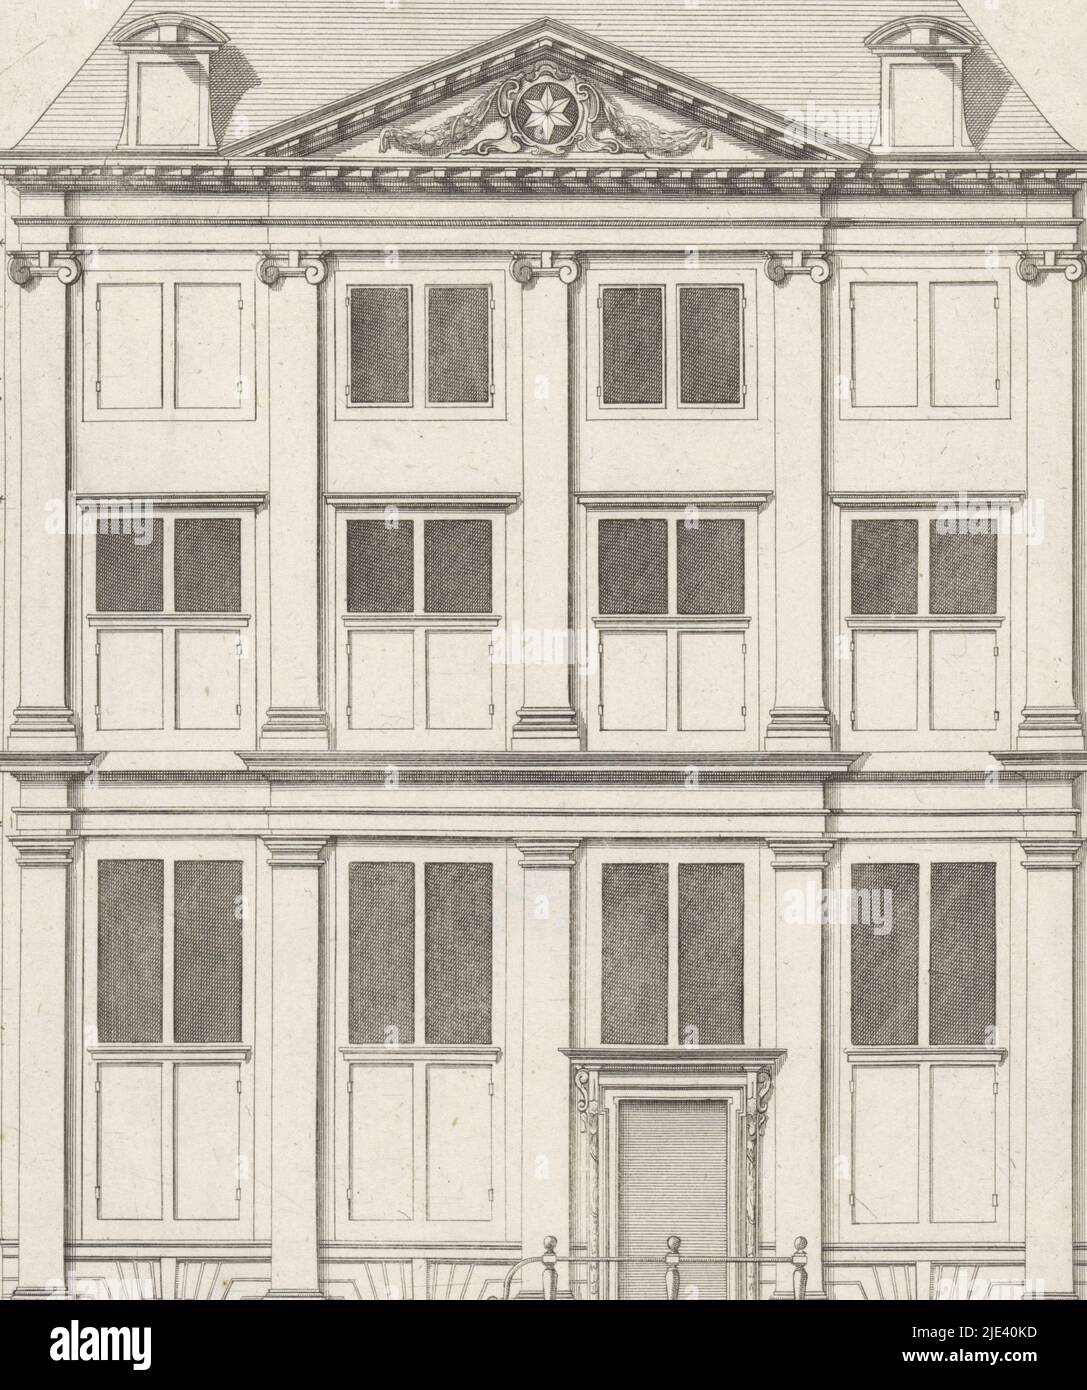 Facade of house De Star or De Ster in Amsterdam, Bastiaen Stopendael, after Philips Vinckboons (II), 1674, Facade of De Ster on the Kloveniersburgwal in Amsterdam. The house was designed by Philips Vingboons for Nicolaas van Bambeeck., print maker: Bastiaen Stopendael, (mentioned on object), Philips Vinckboons (II), (mentioned on object), Amsterdam, 1674, paper, etching, engraving, h 348 mm × w 219 mm Stock Photo